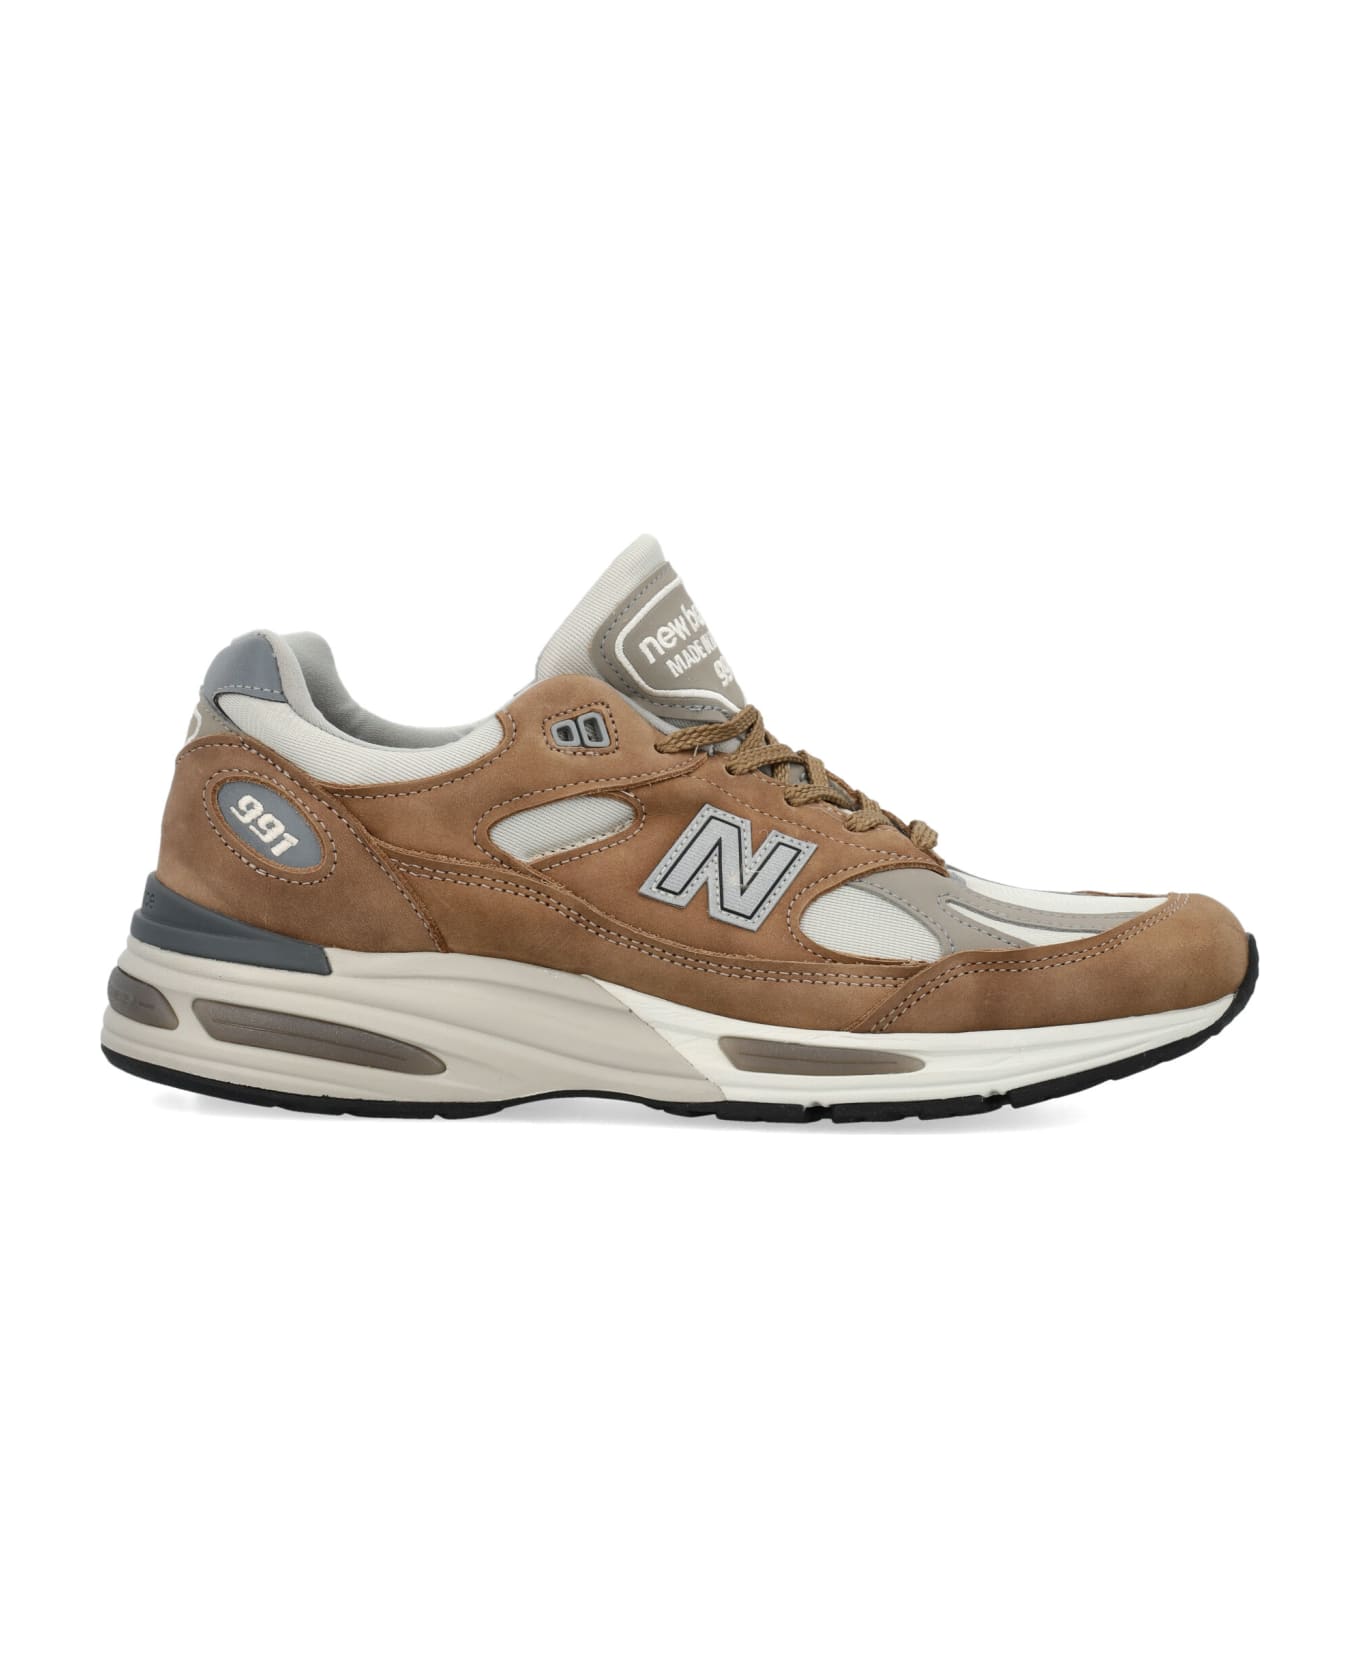 New Balance 991 Sneakers - BROWN スニーカー